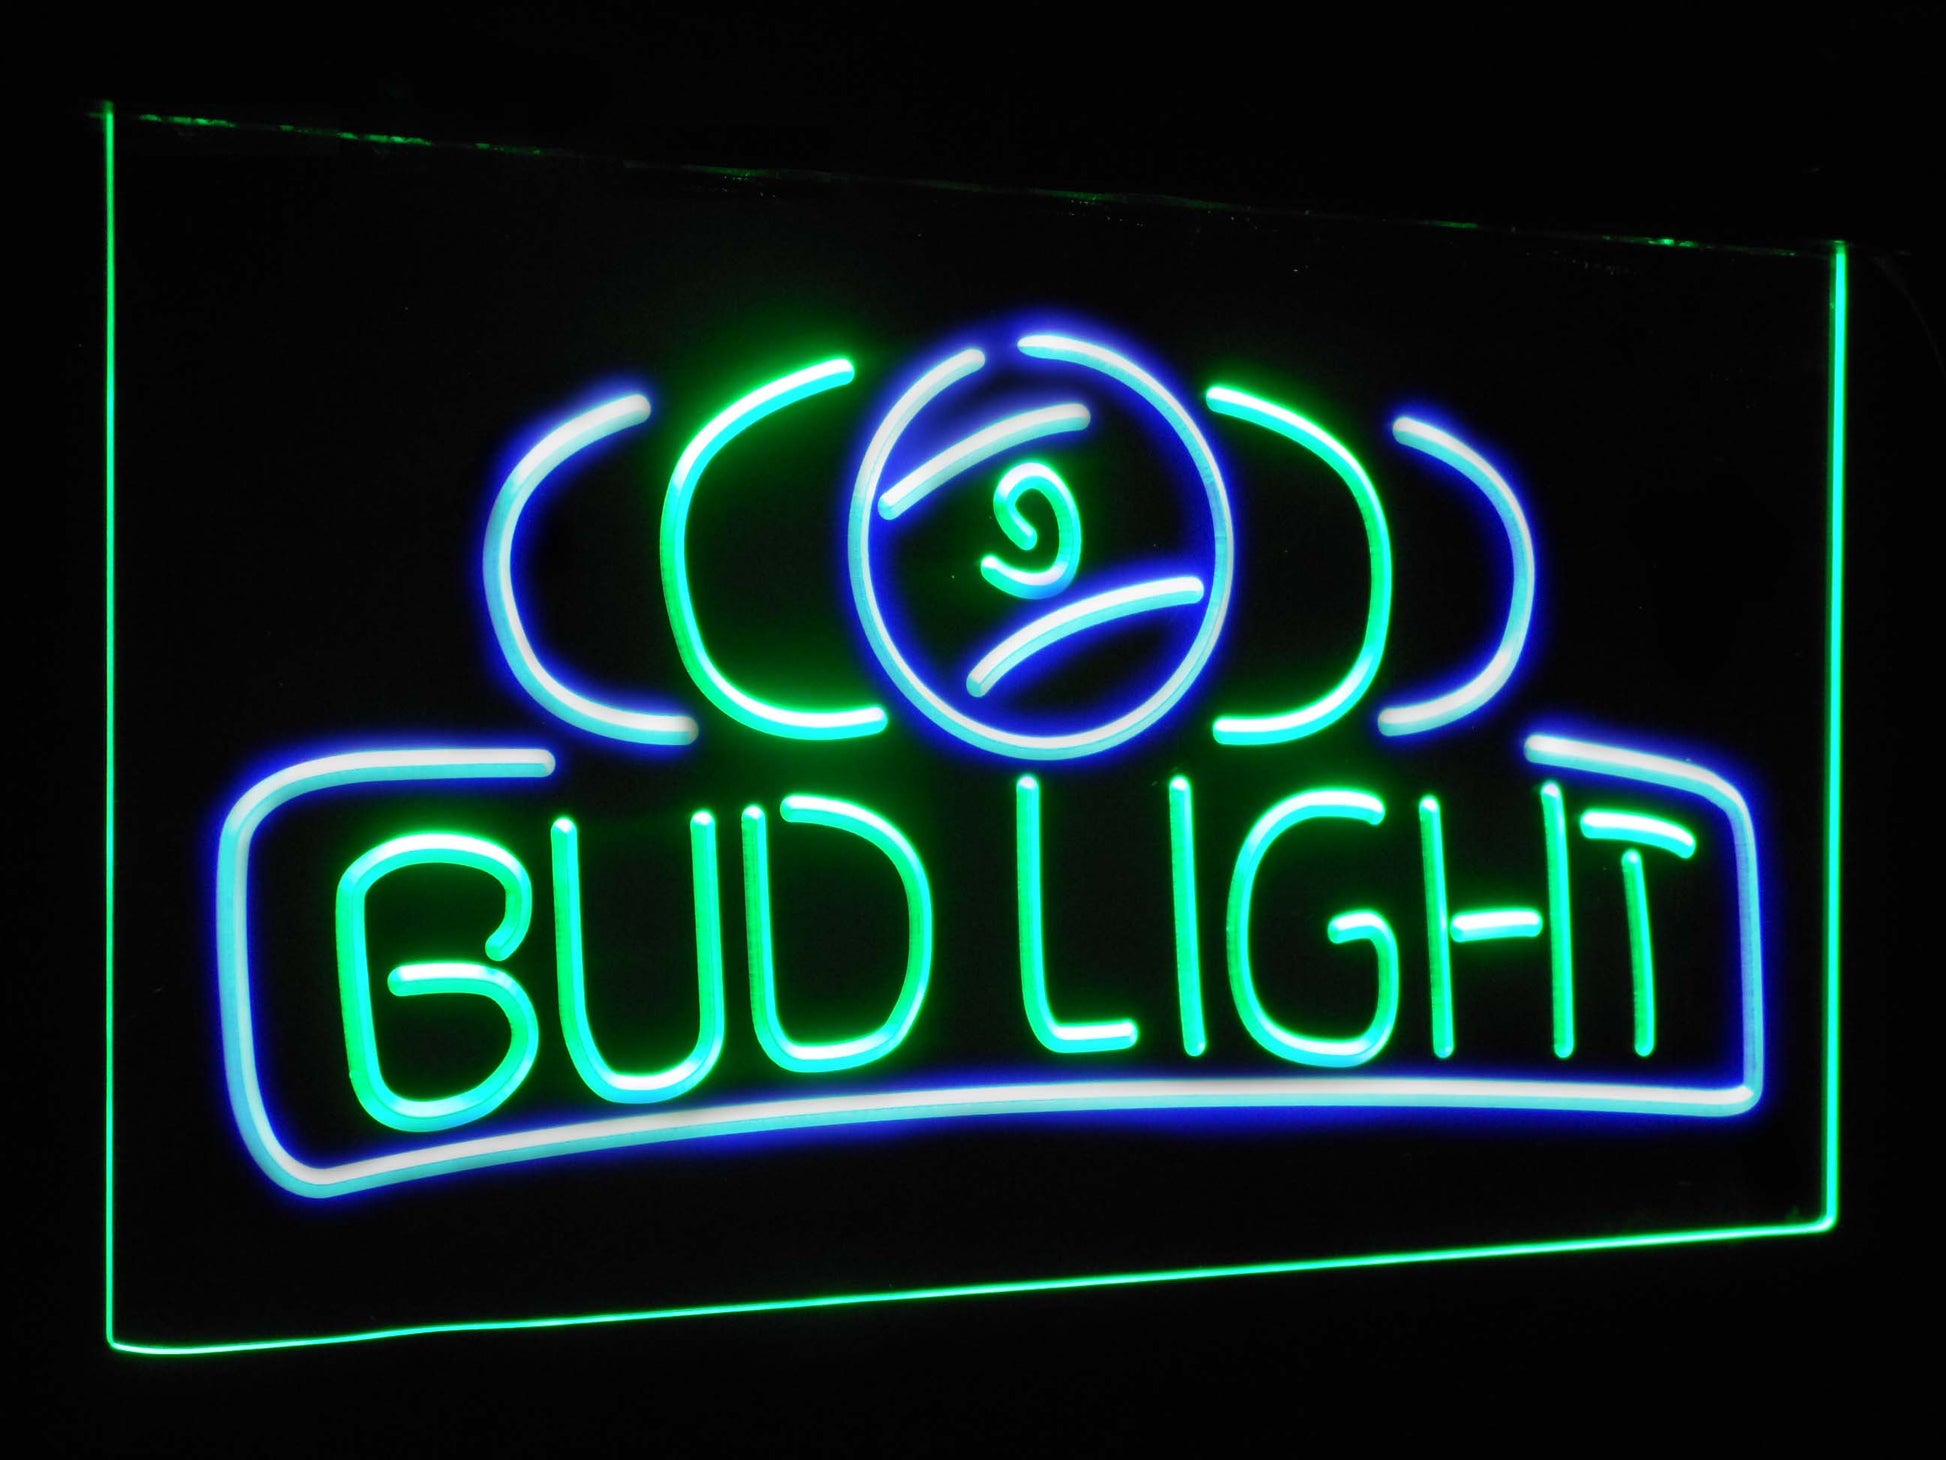 Bud Light Pool Room 9 Ball Snooker Billiard Dual Color Led Neon Light Signs st6-a2056 by Woody Signs Co. - Handmade Crafted Unique Wooden Creative